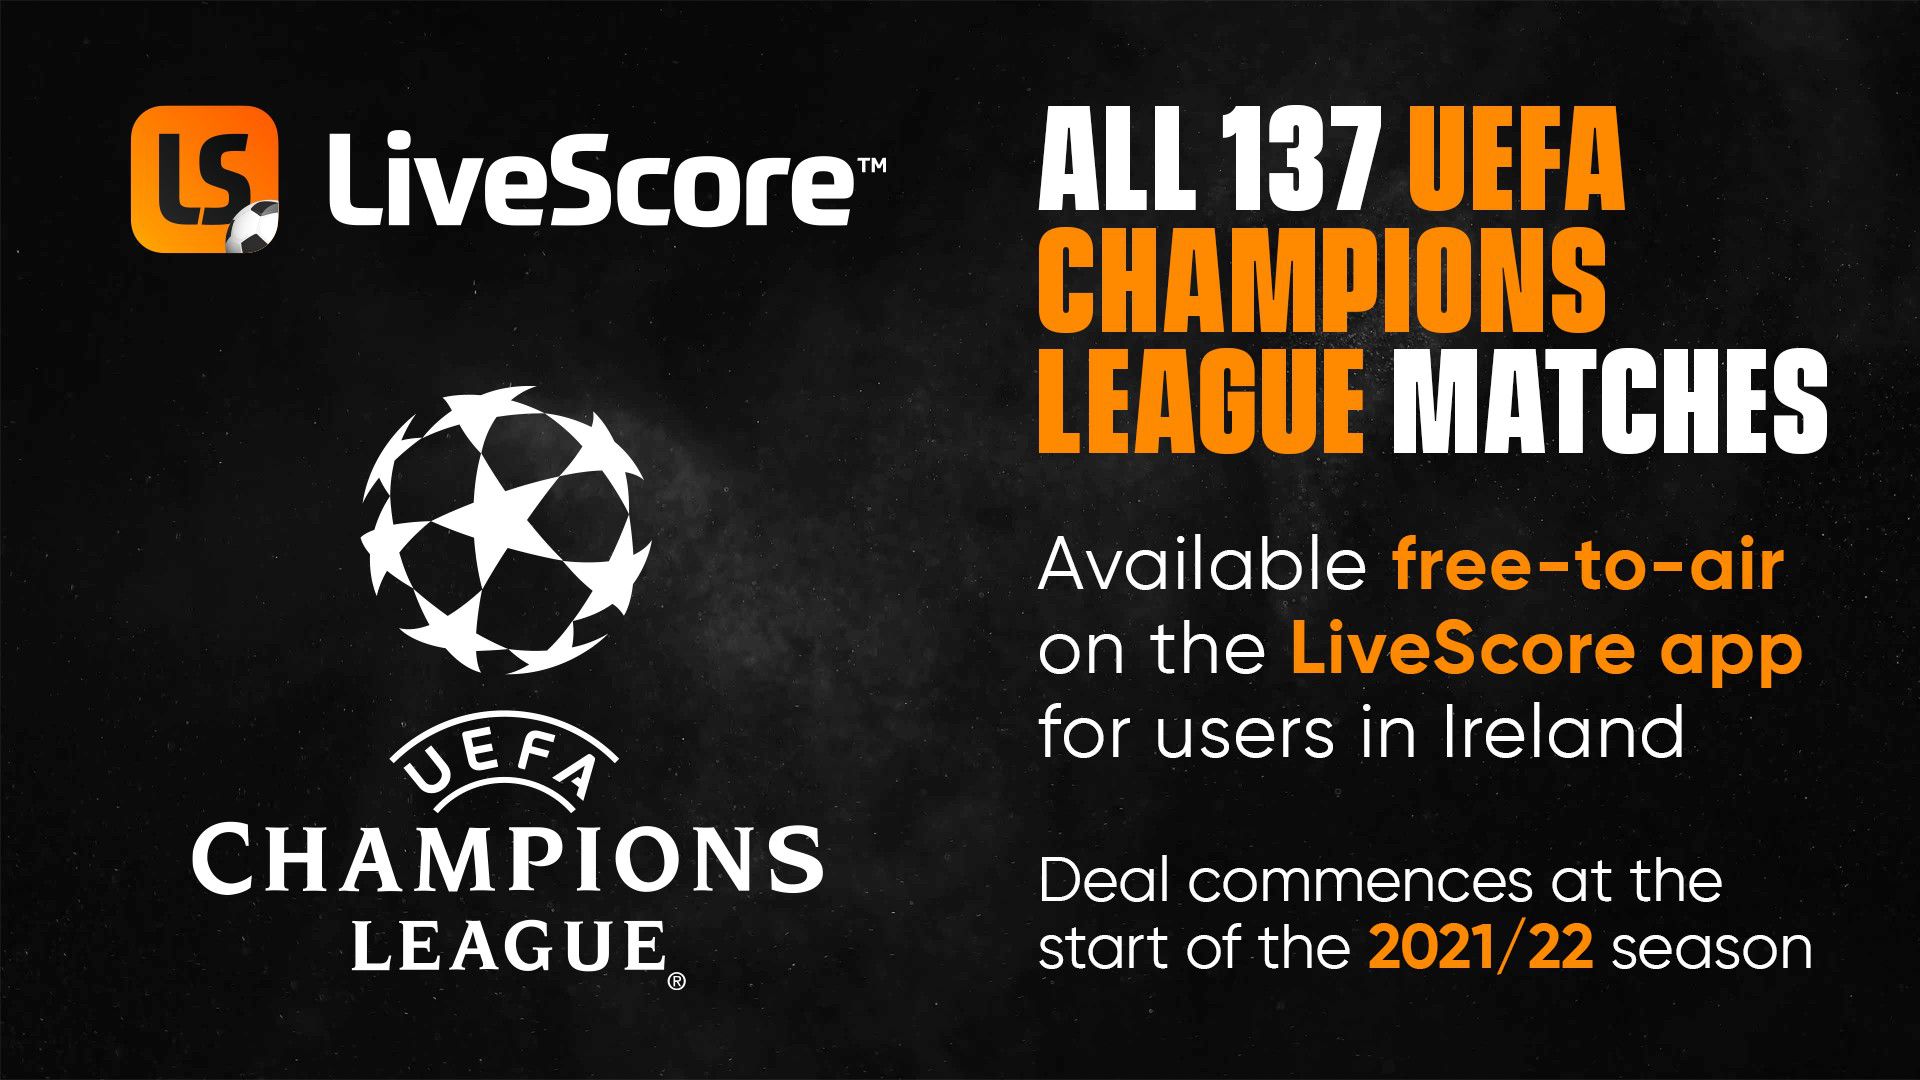 Livescore Updates in All Leagues